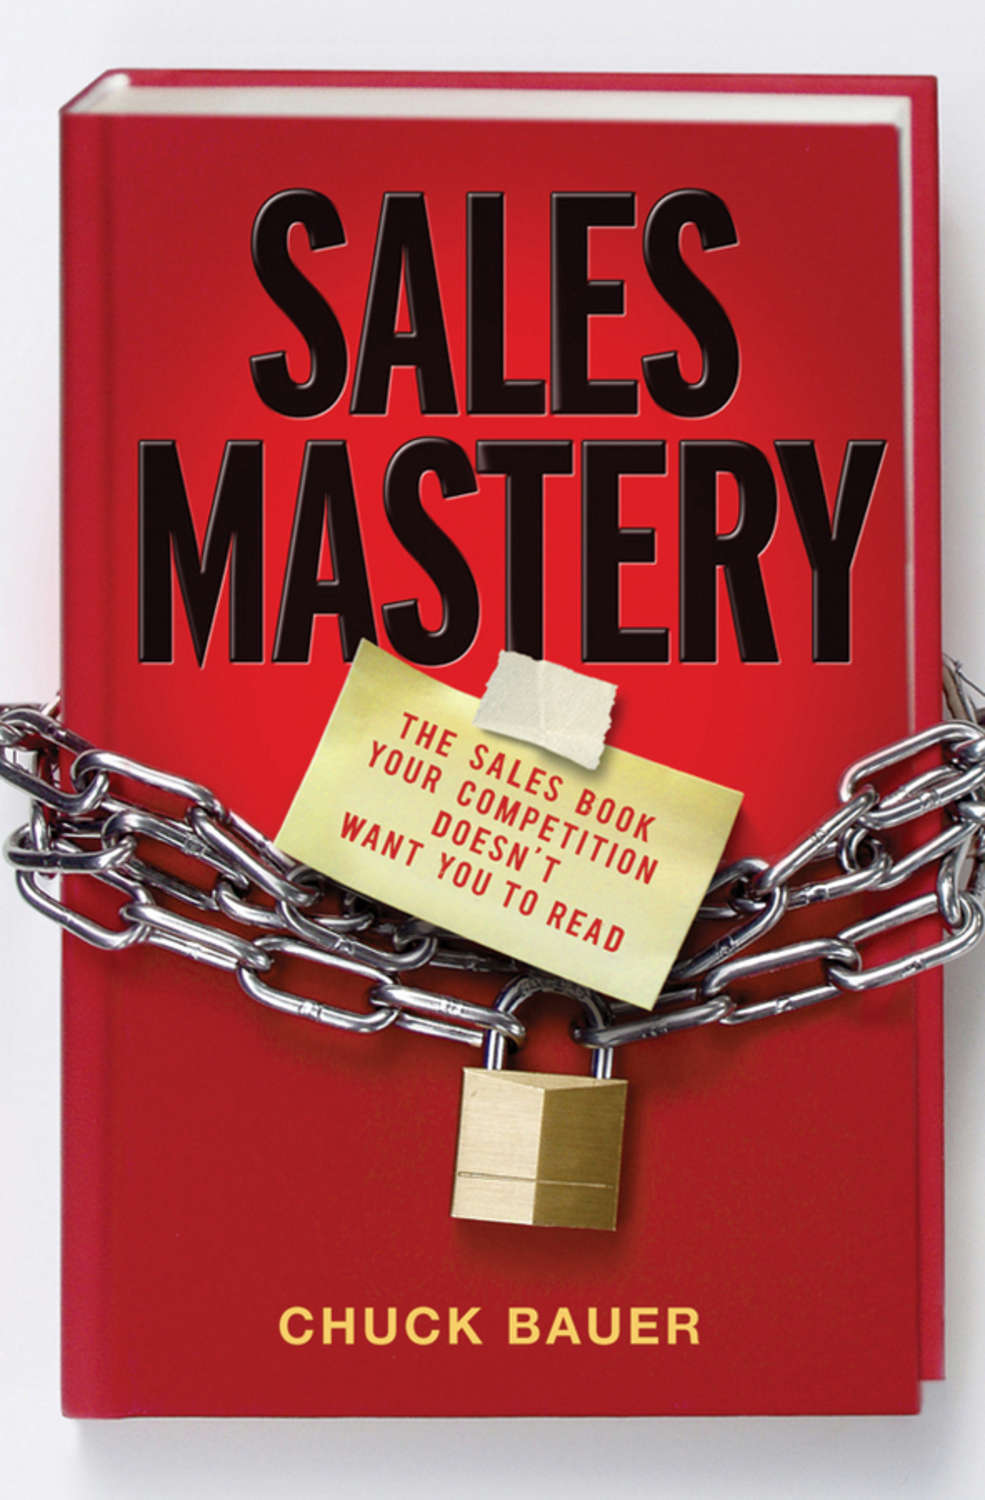 Mastery книга. The sales book. Sale. In sales.